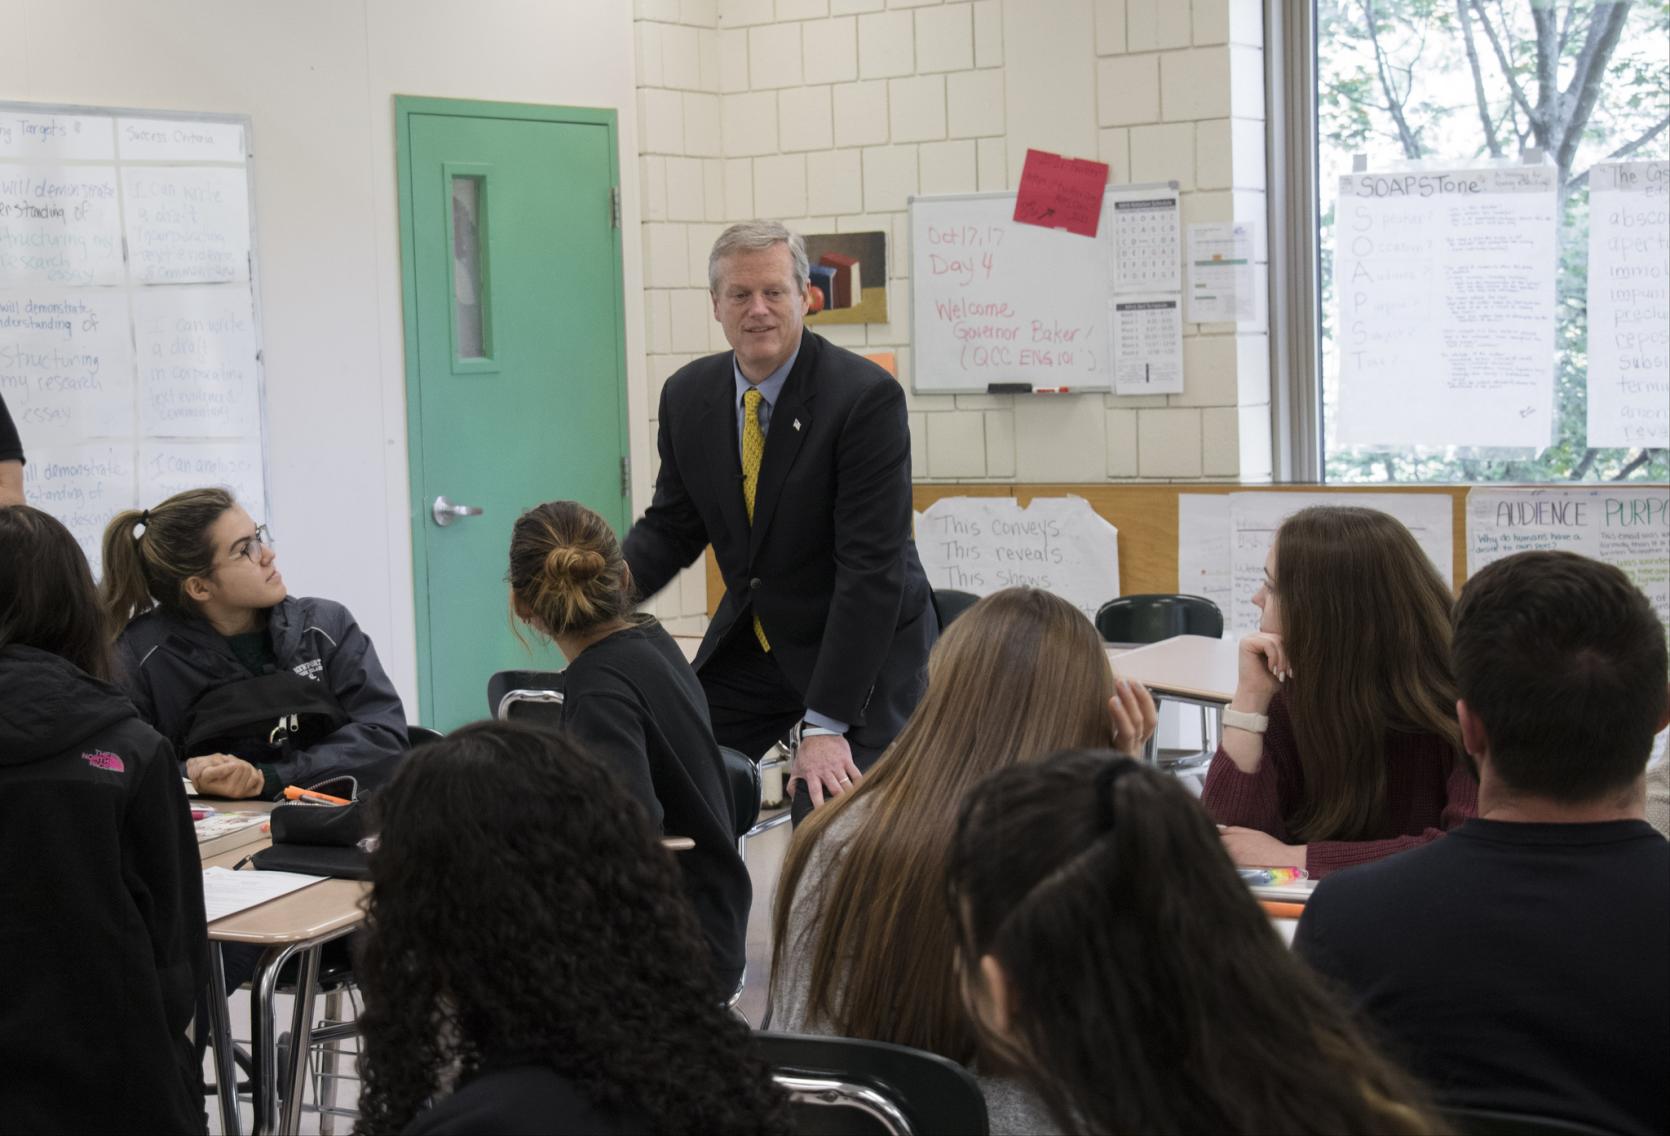 Governor Baker speaks to students at Marlborough High School.